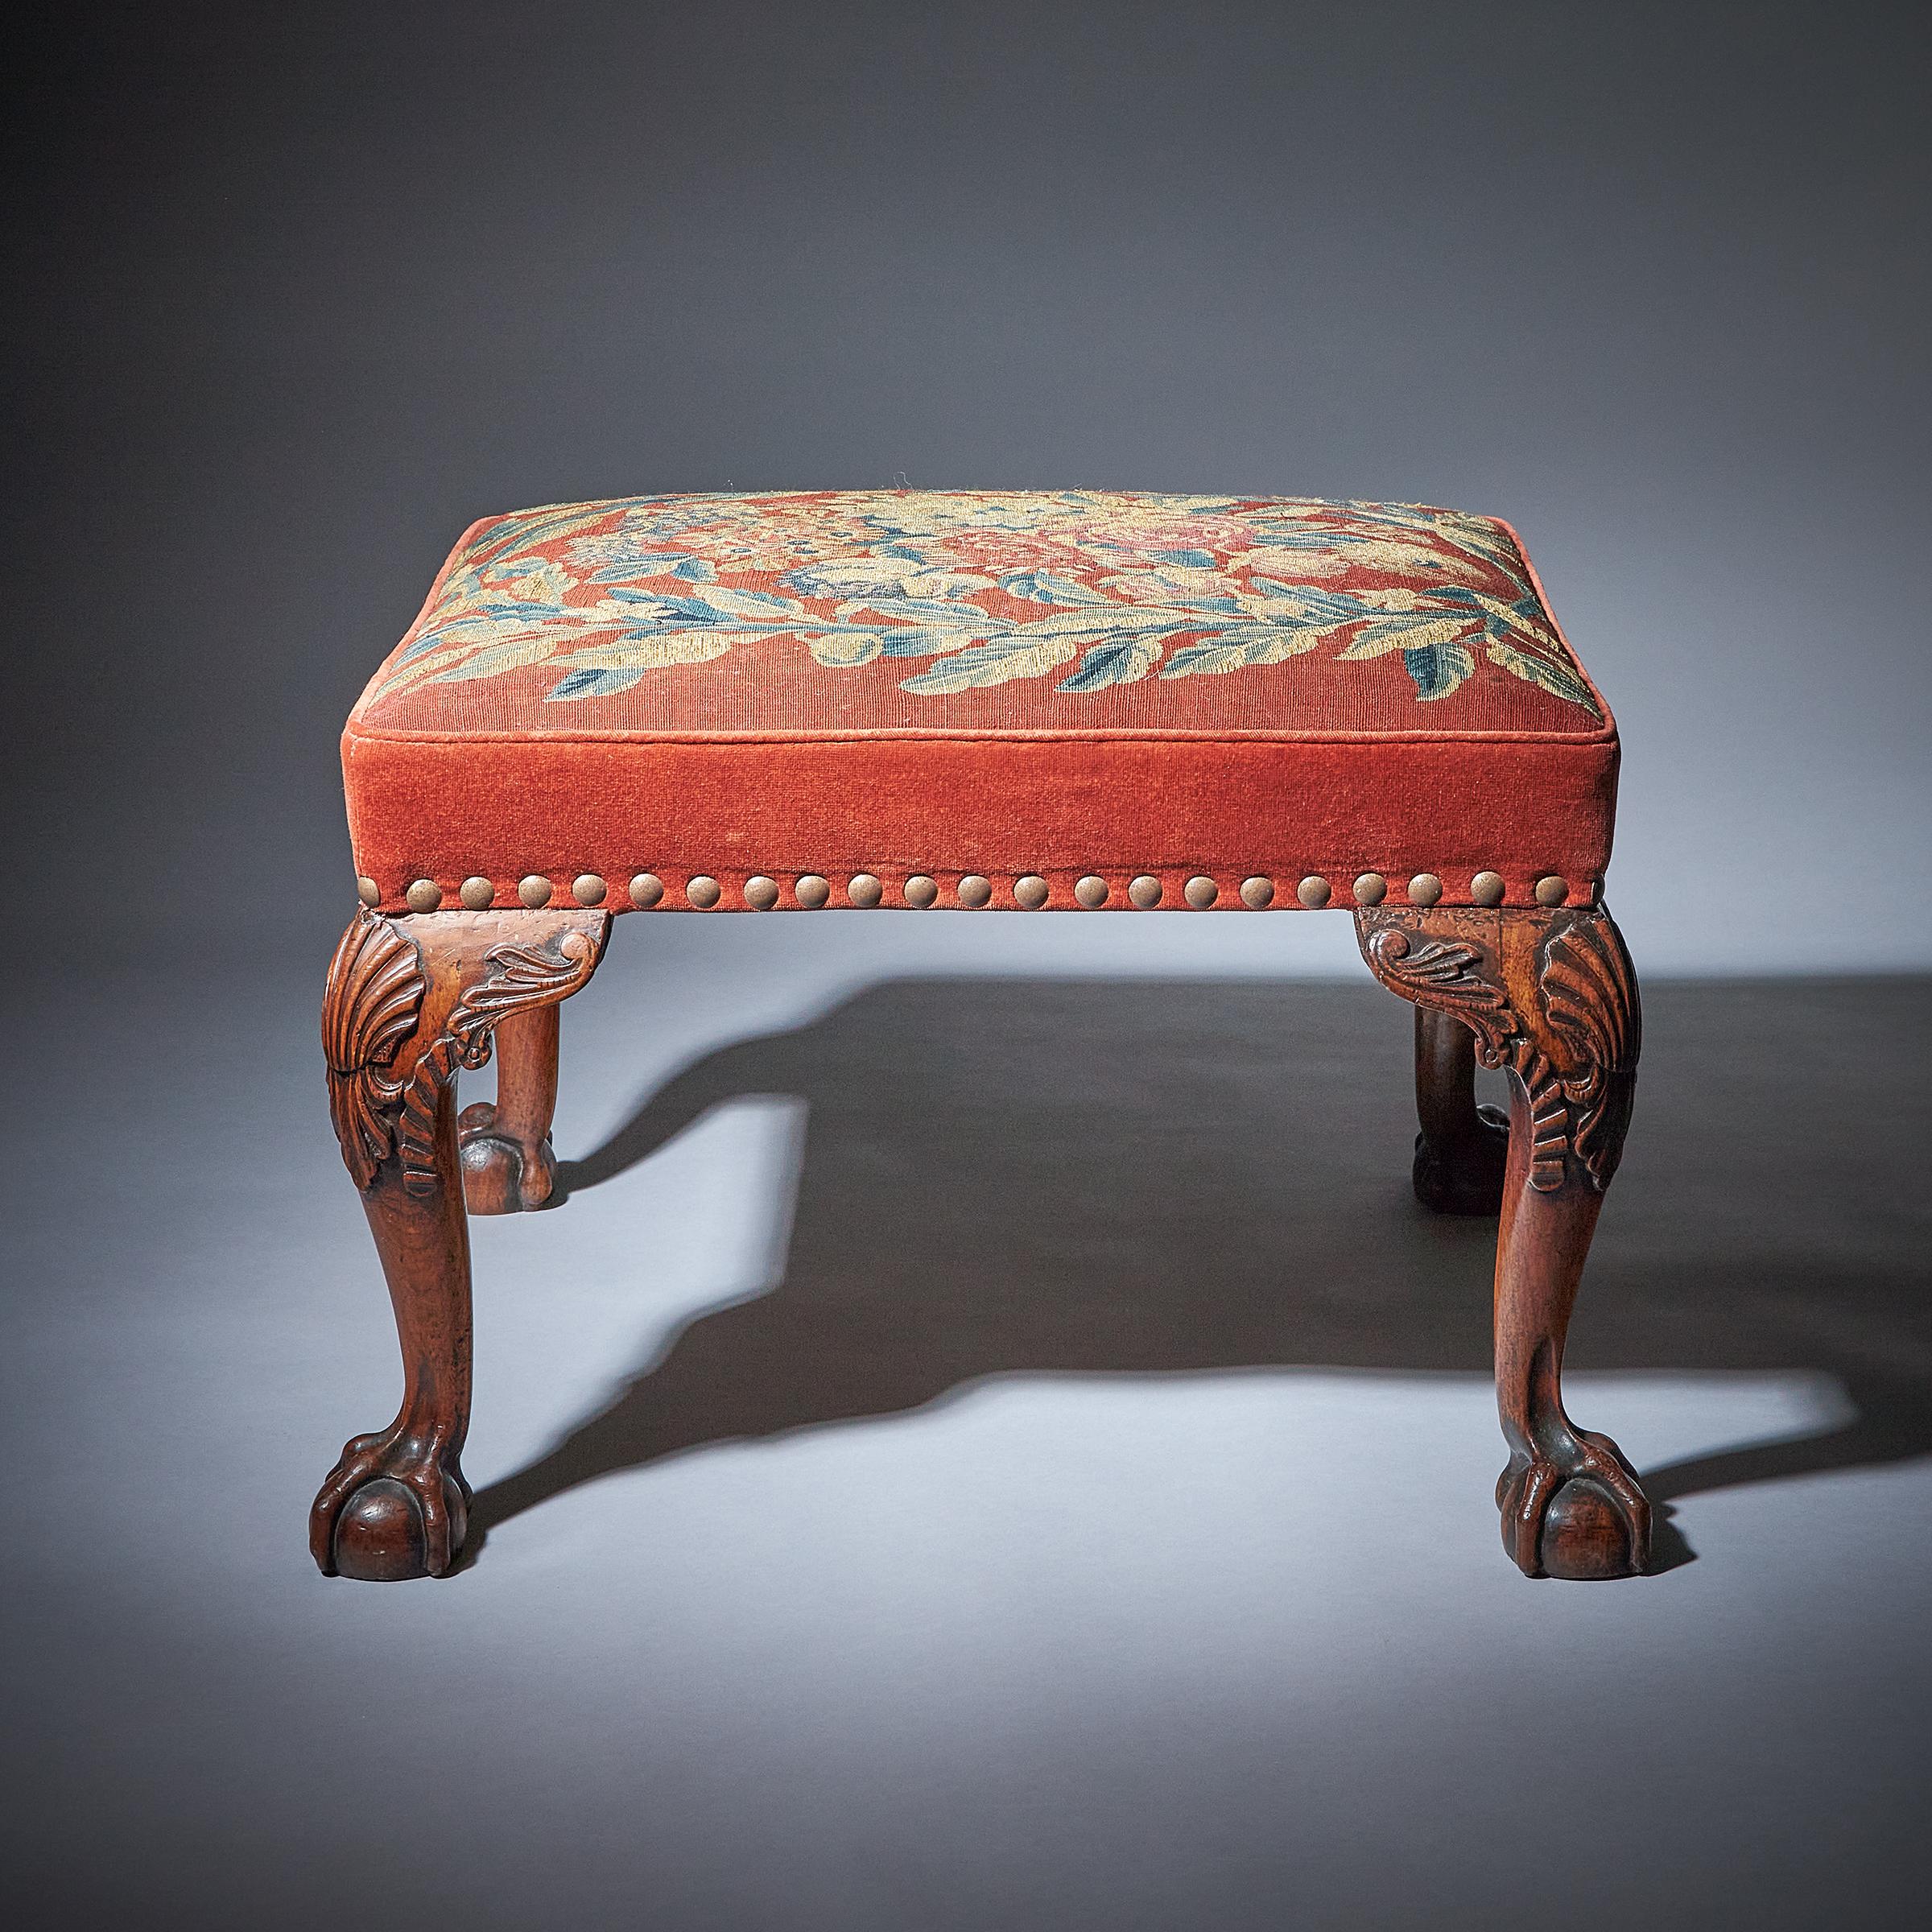 An Important 18th century George II Carved Walnut Stool, Circa 1730-1740 England. 

Sitting on four solid walnut carved cabriole legs eared with scrolling leaves of acanthus, scallop shells to each knee and trailing pendant each terminating on